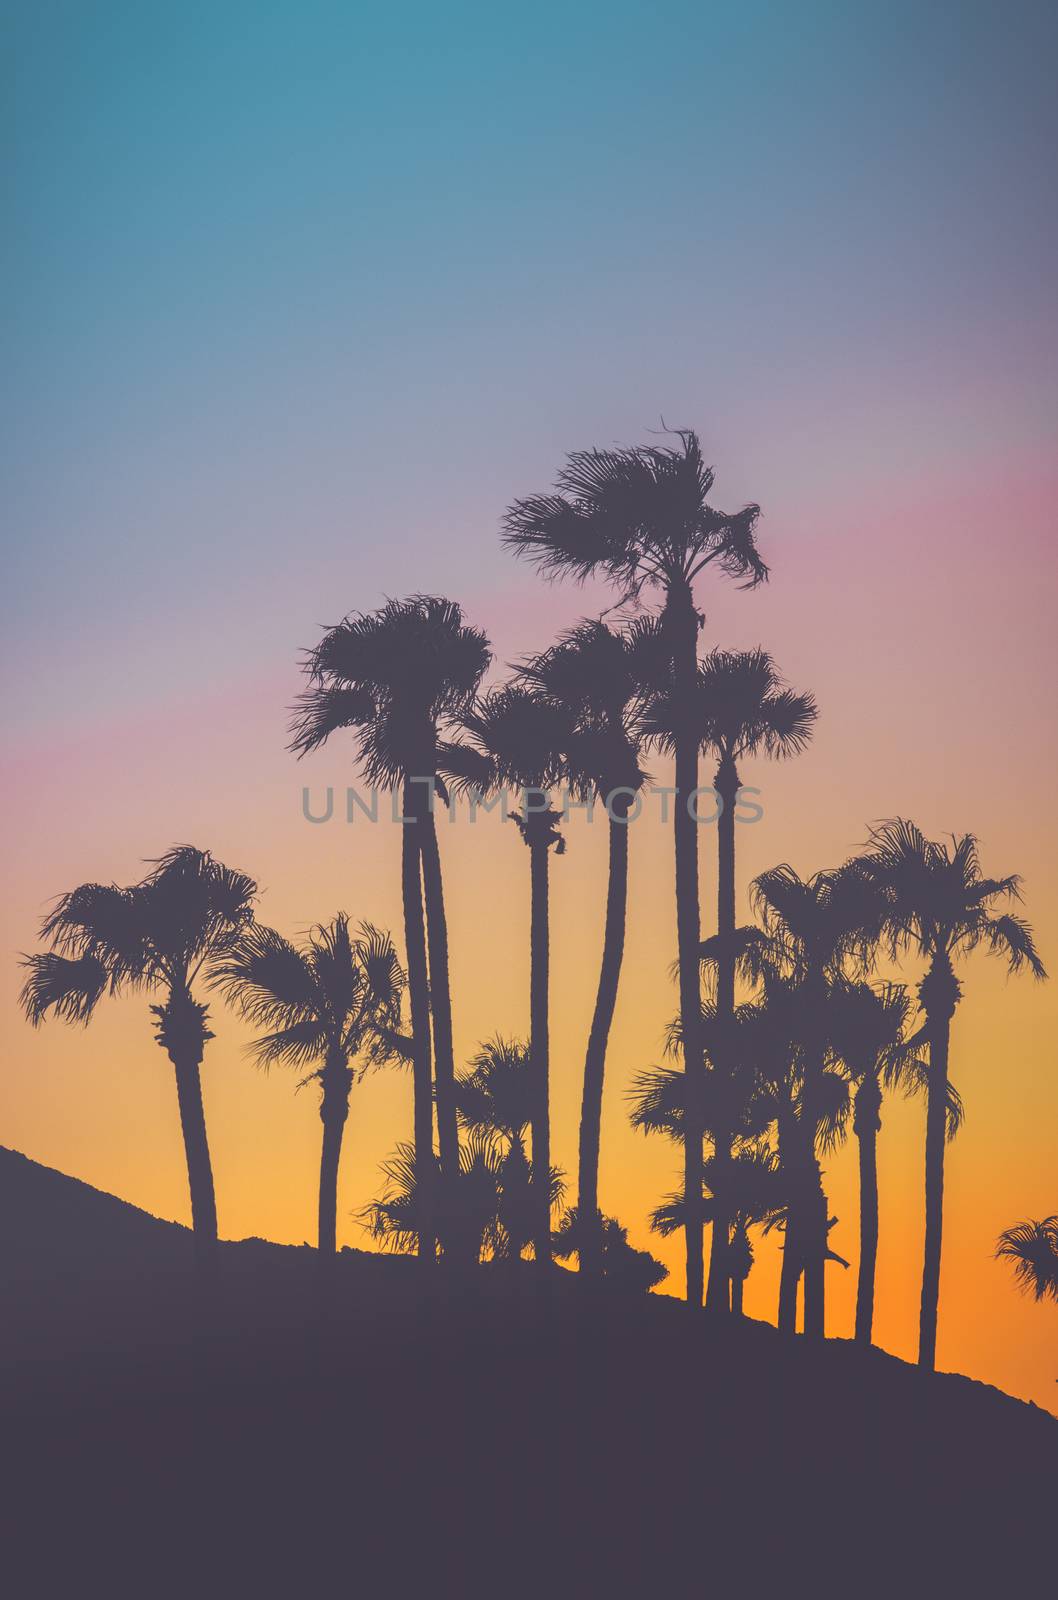 Retro Filtered Tropical Palm Trees Against A Vibrant Sunset With Copy Space Above And Below